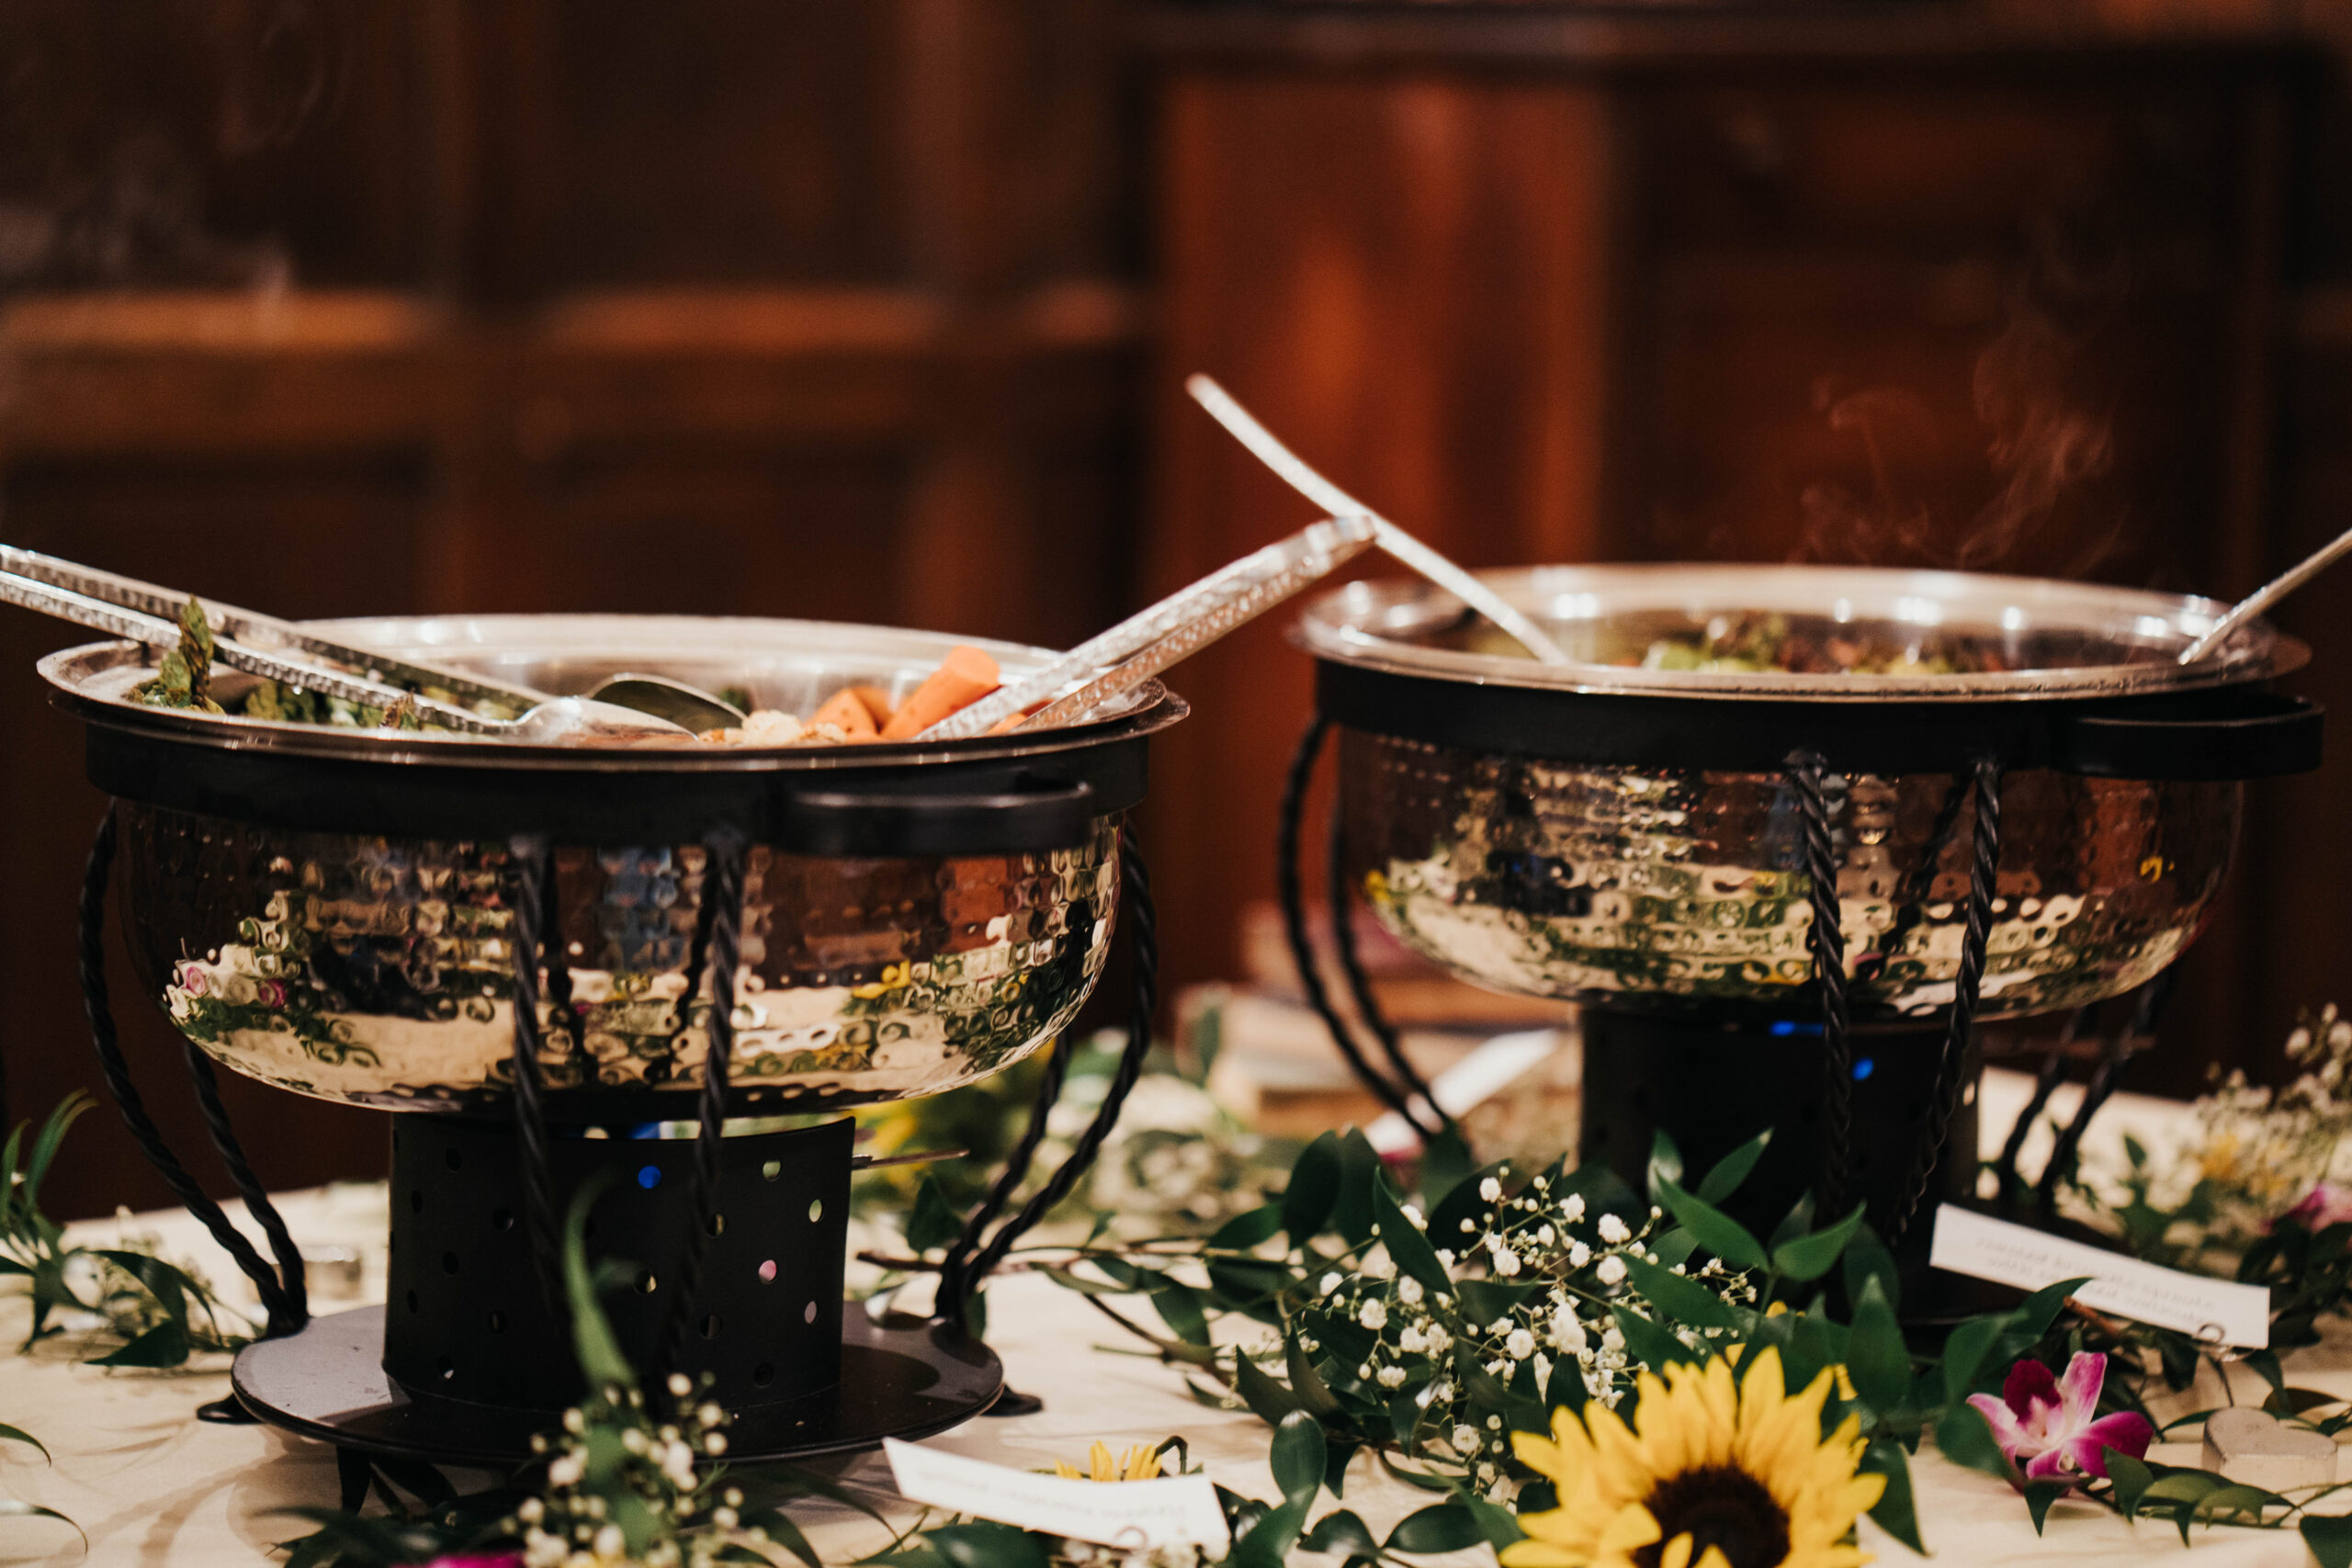 Buffet line with hot food, decorated with flowers